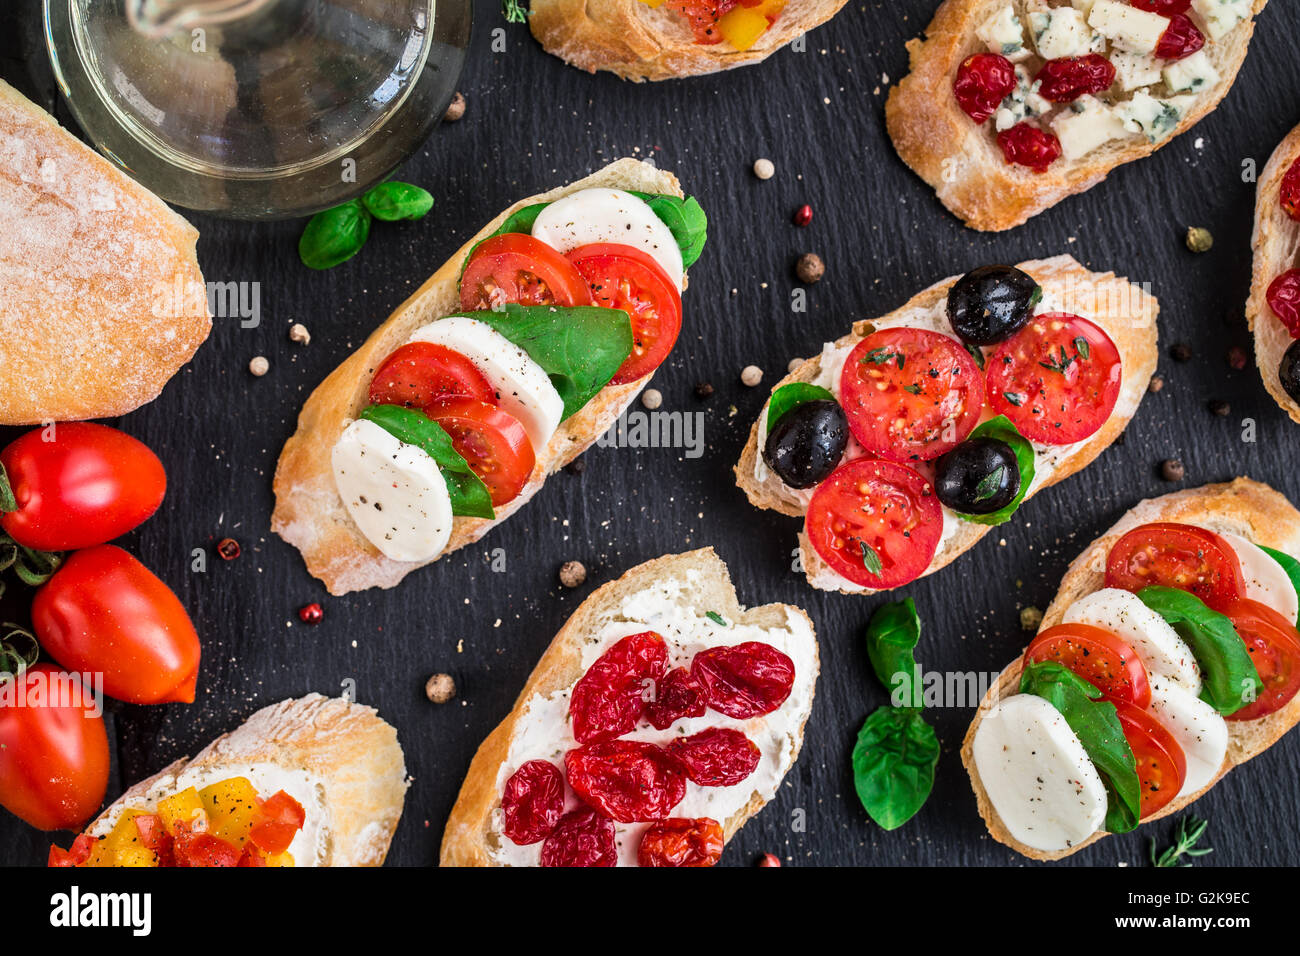 Bruschettas with tomatoes, herbs and olives Stock Photo